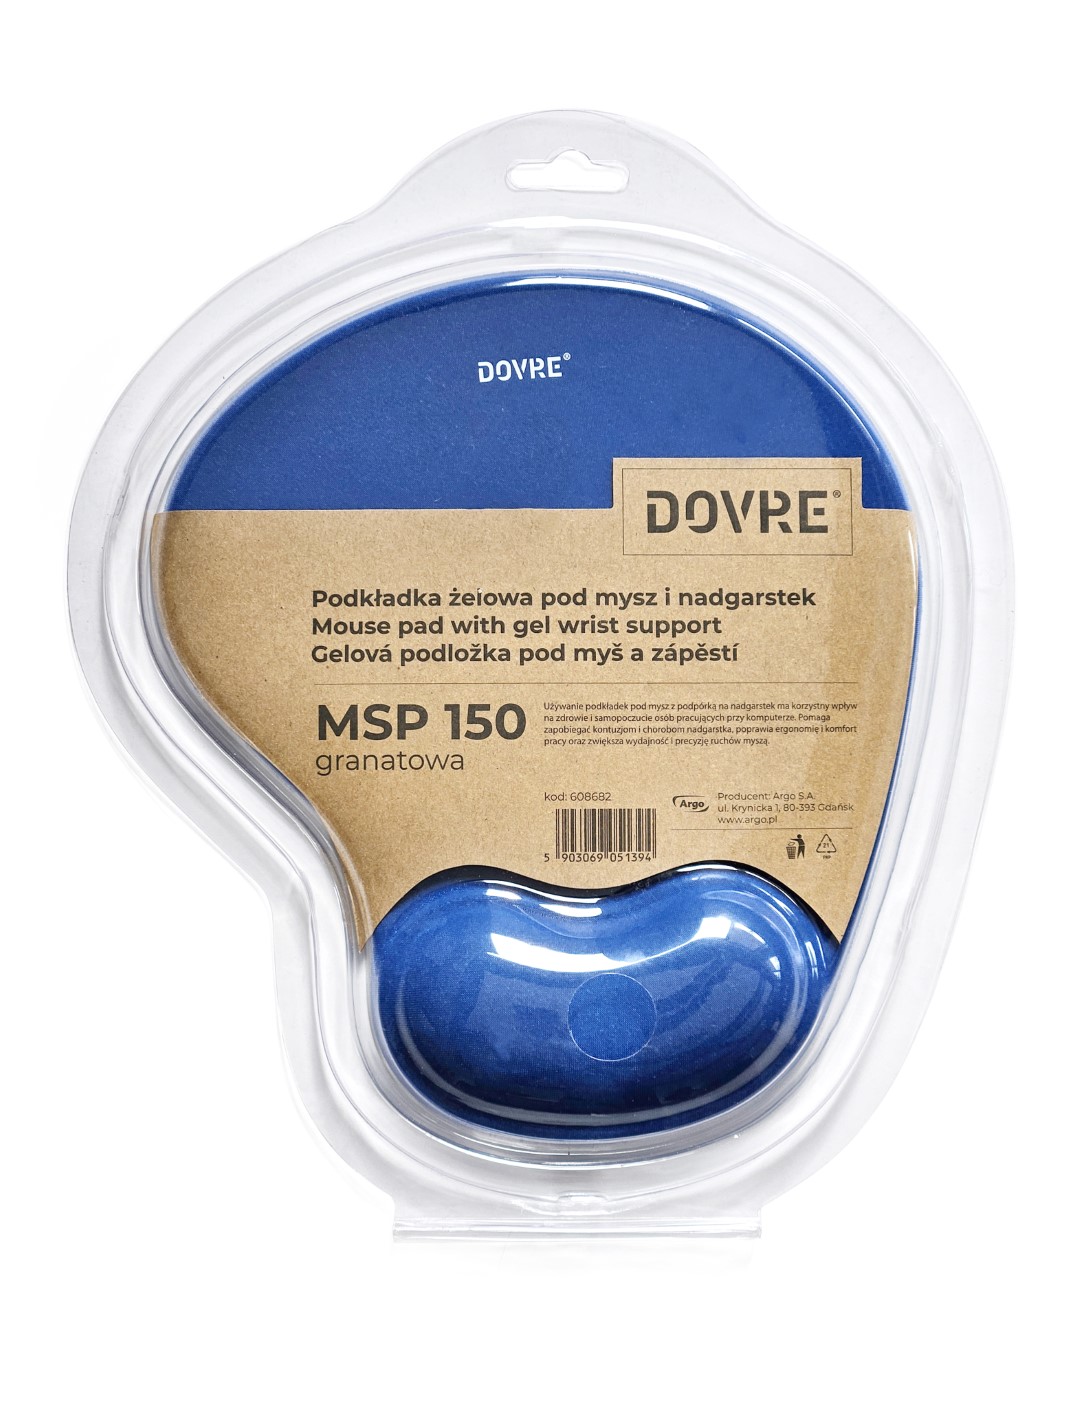 Mouse pad with gel wrist support MSP 150 DOVRE